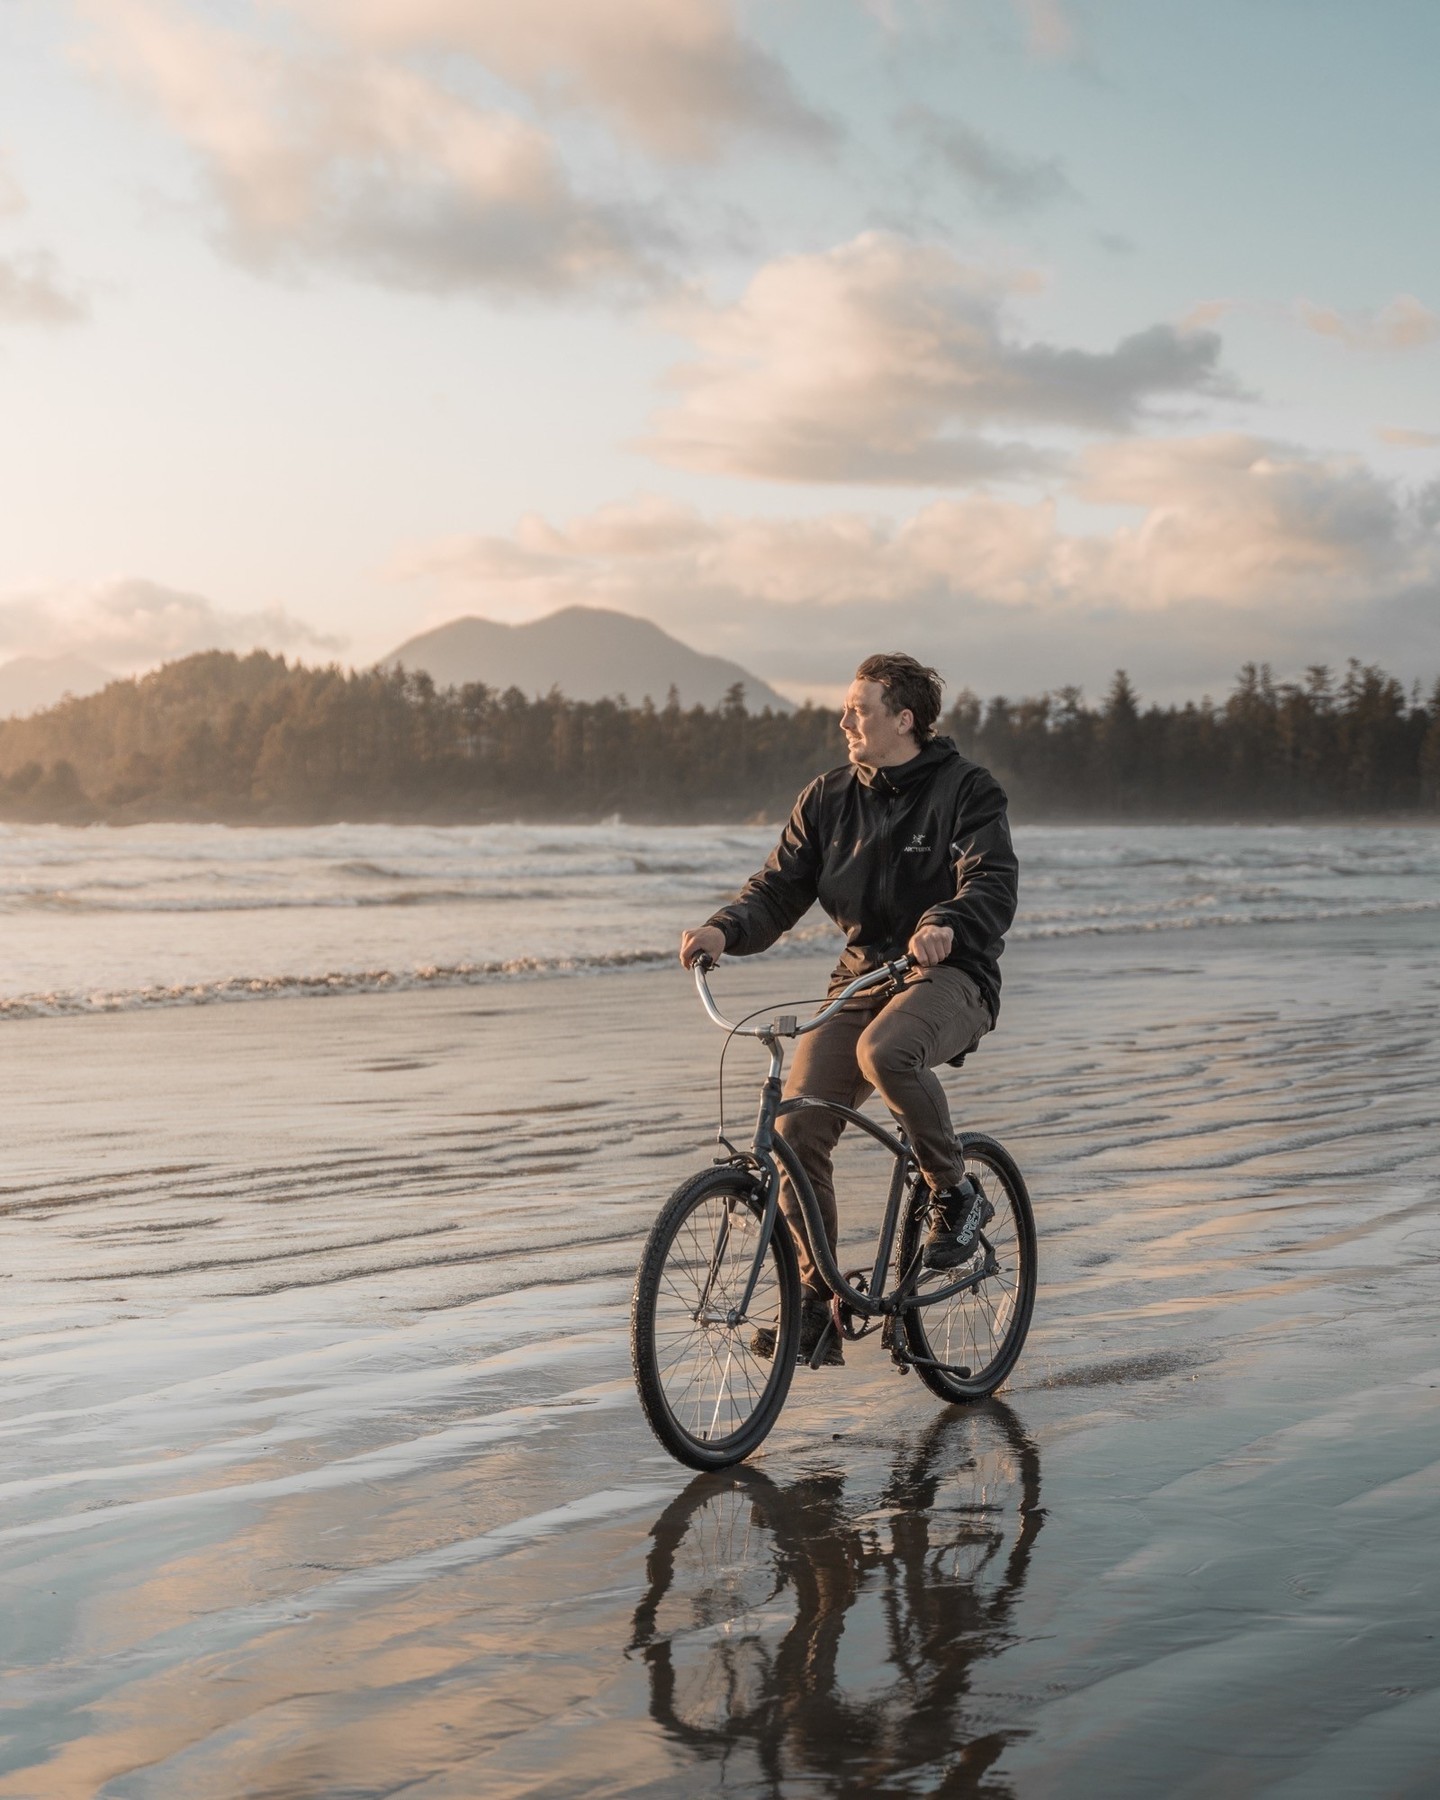 Vancouver outdoor clothing brand make waterproof denim jeans  Vancouver Is  Awesome